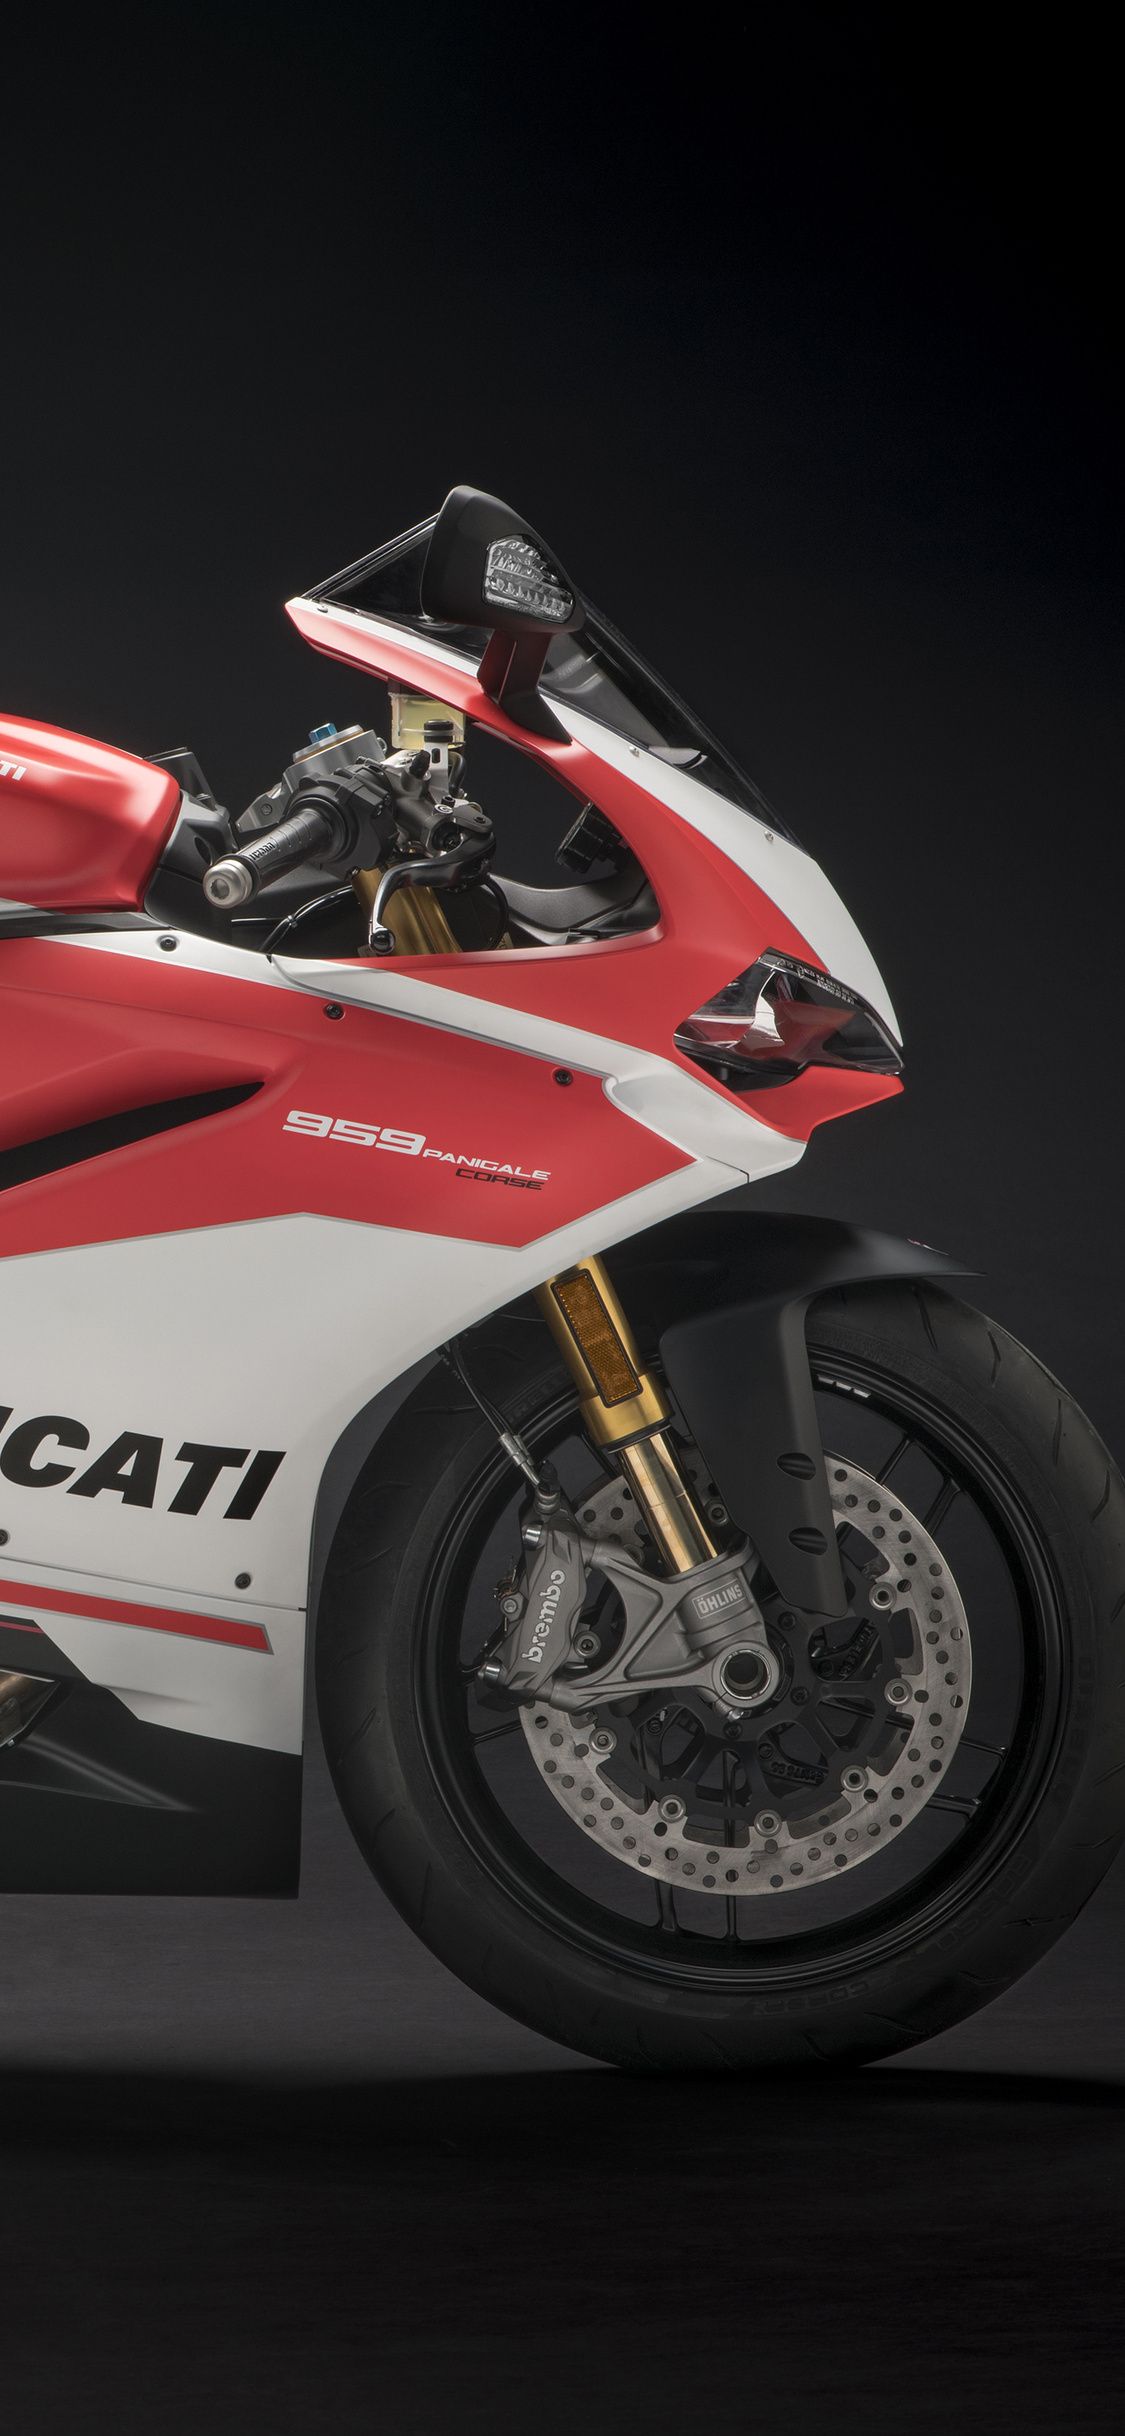 Ducati Panigale 959 4k iPhone XS, iPhone iPhone X HD 4k Wallpaper, Image, Background, Photo and Picture